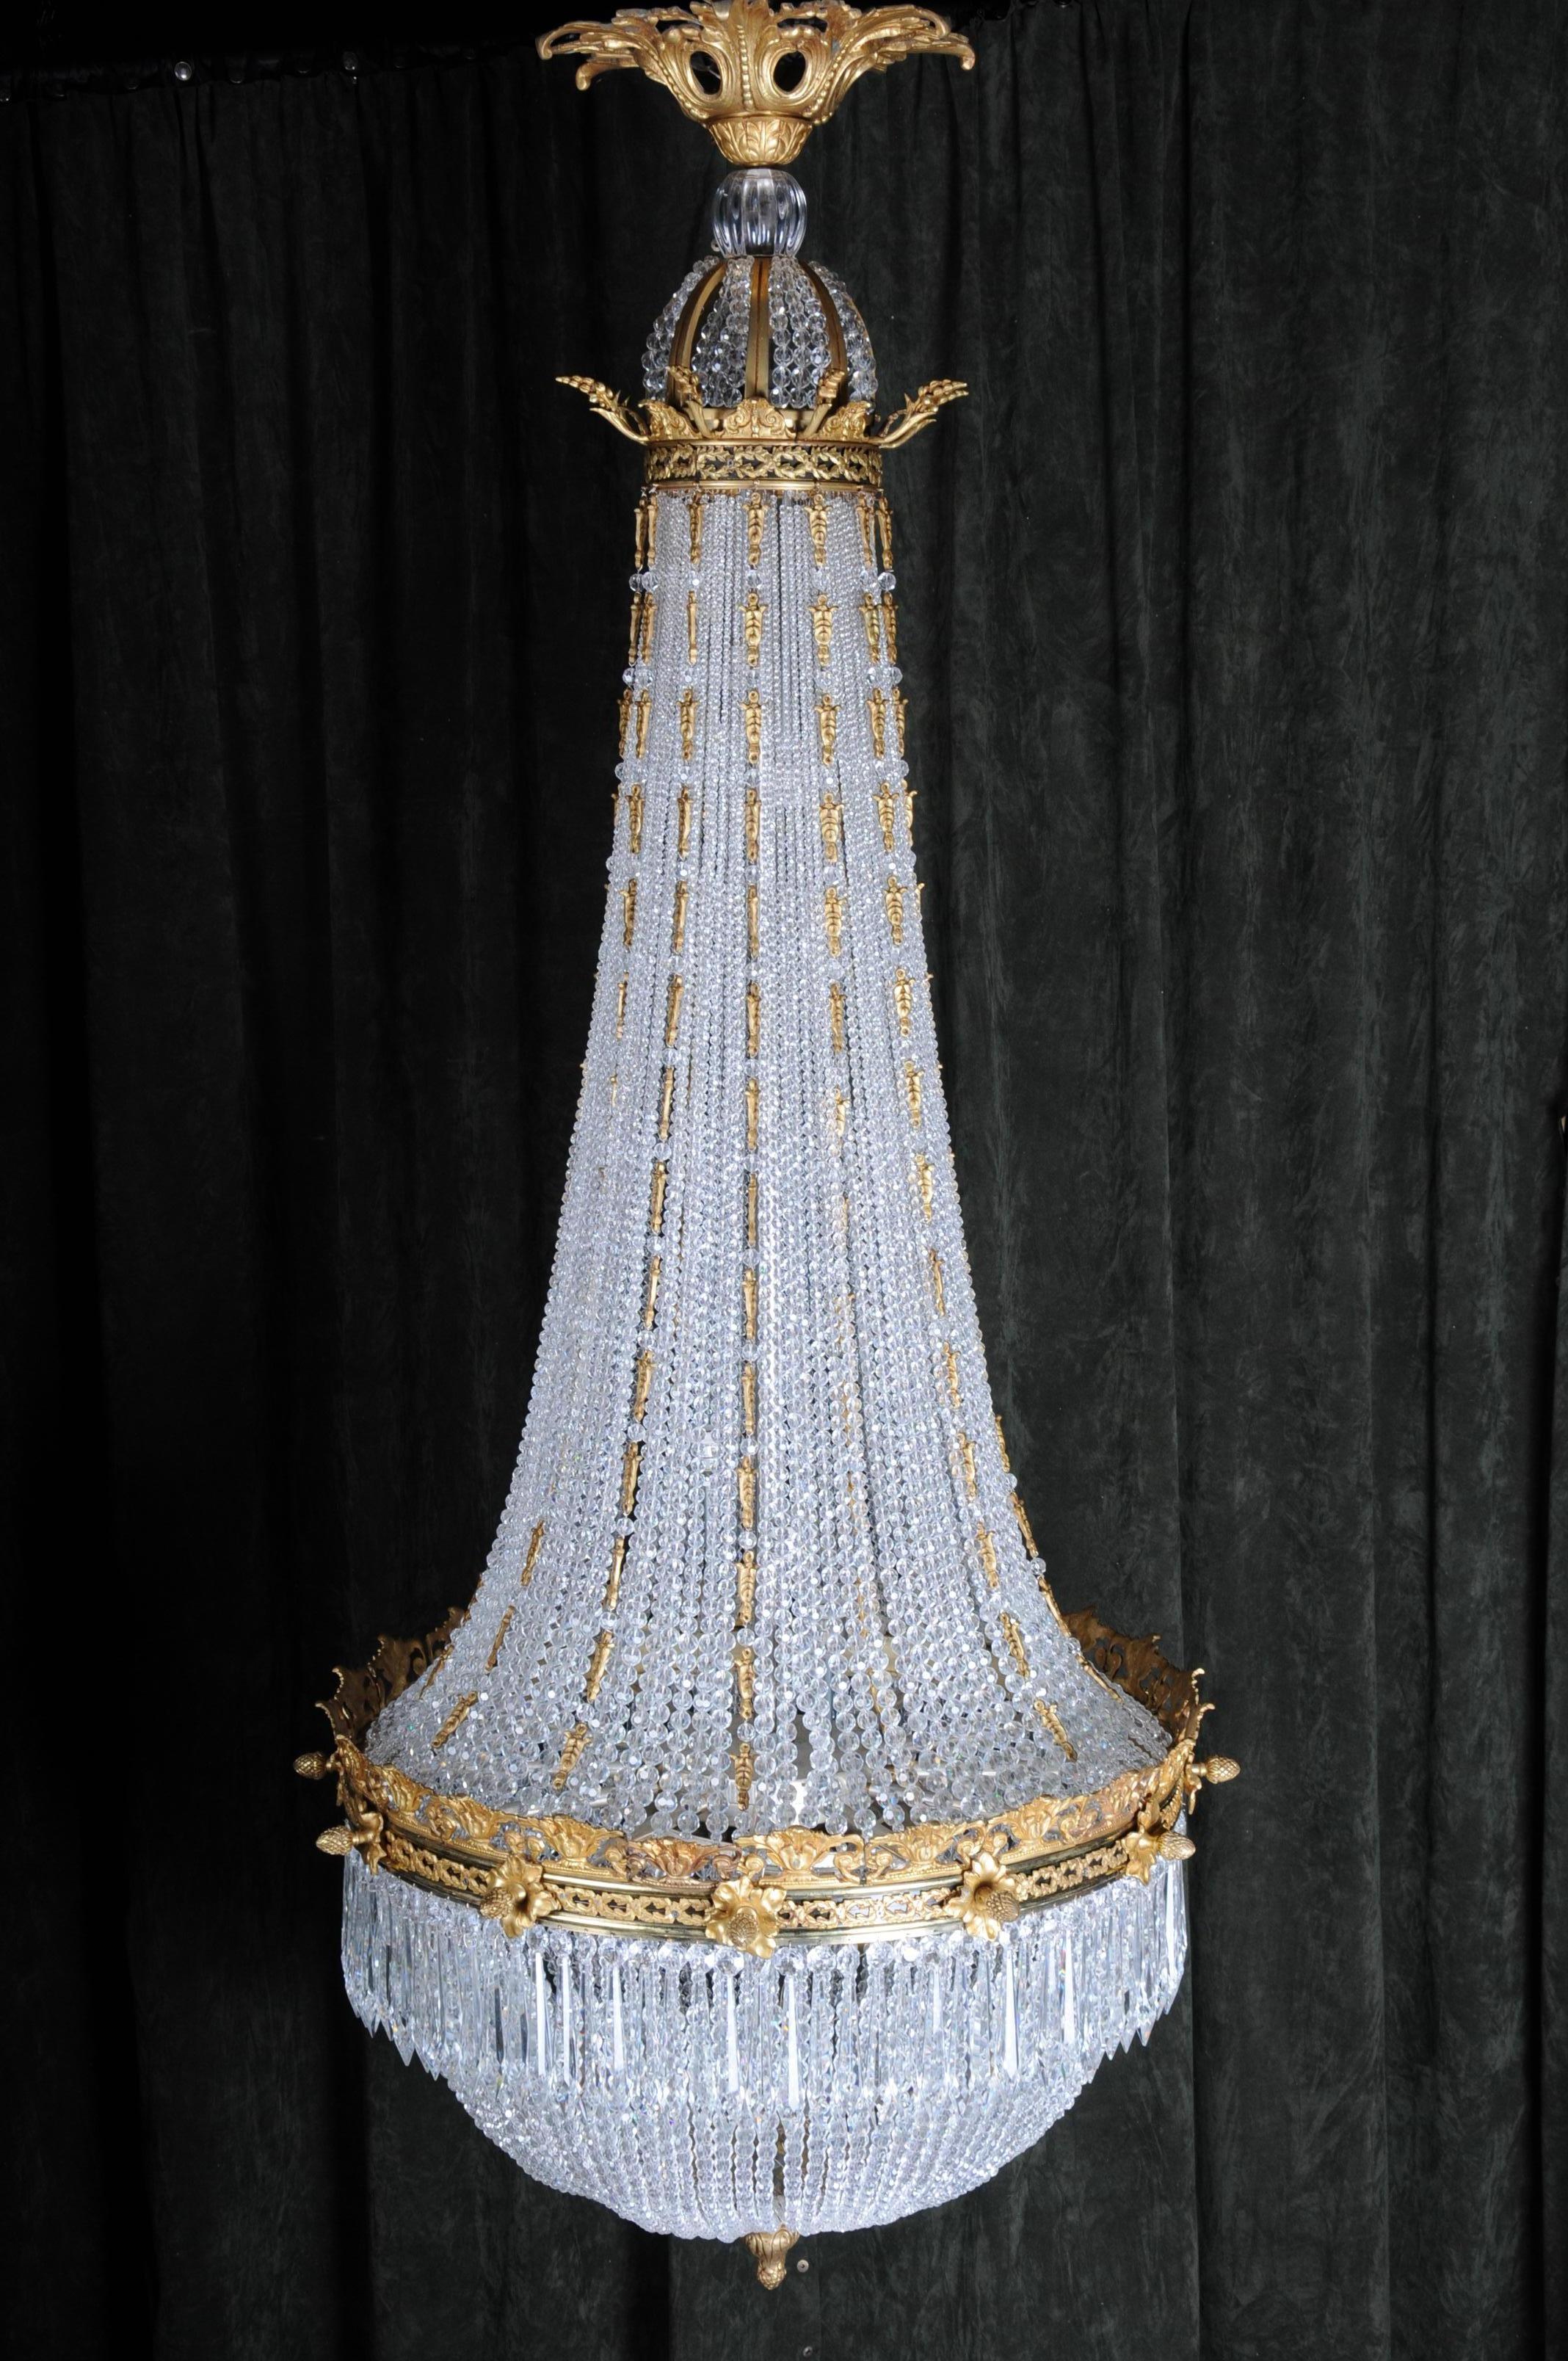 Monumental splendid Classicist ceiling candelabra/chandelier Empire style

Fine, engraved and cast Bronze. Basket-formed corpus from handcut frenches ball prisms. Connected through wide, ornamental reliefed and broken hoop. Ending in Baldachin